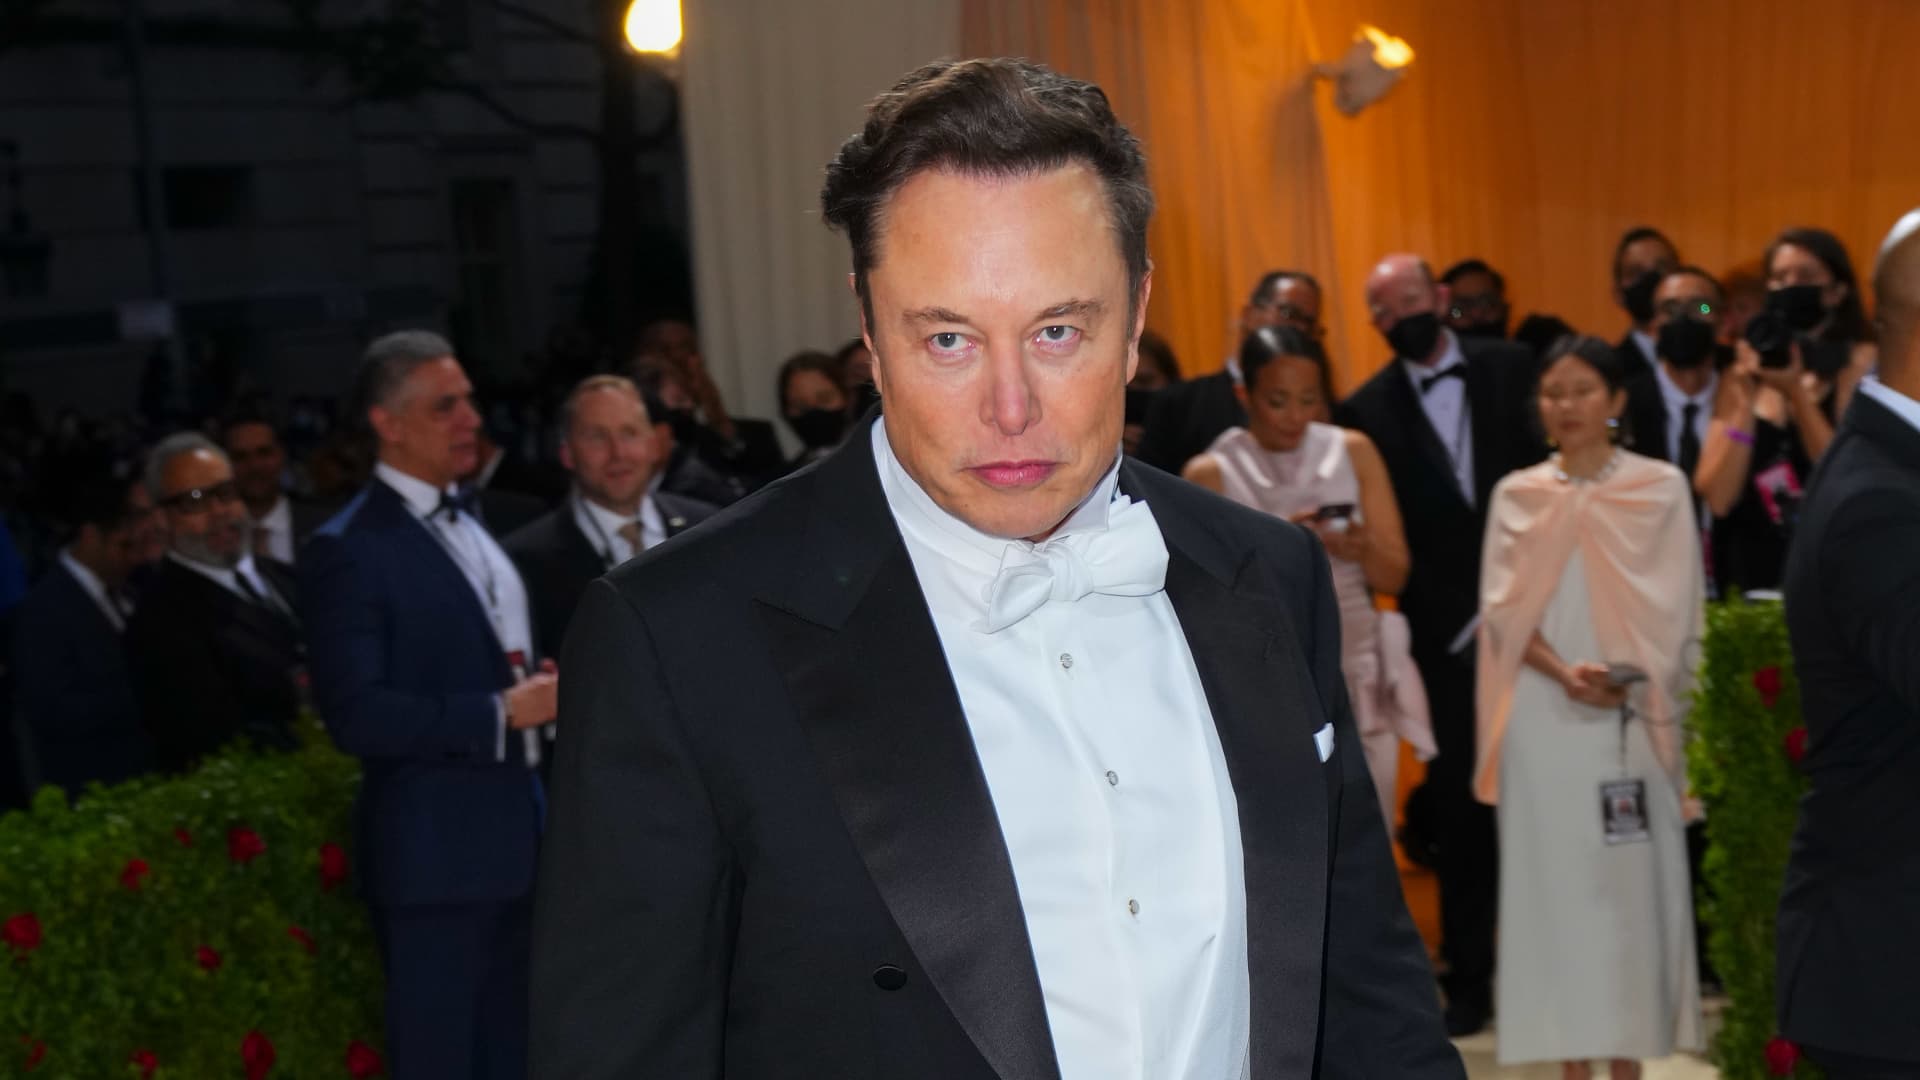 Tesla stock has dropped more than 35% since Elon Musk first said he’d buy Twitte..